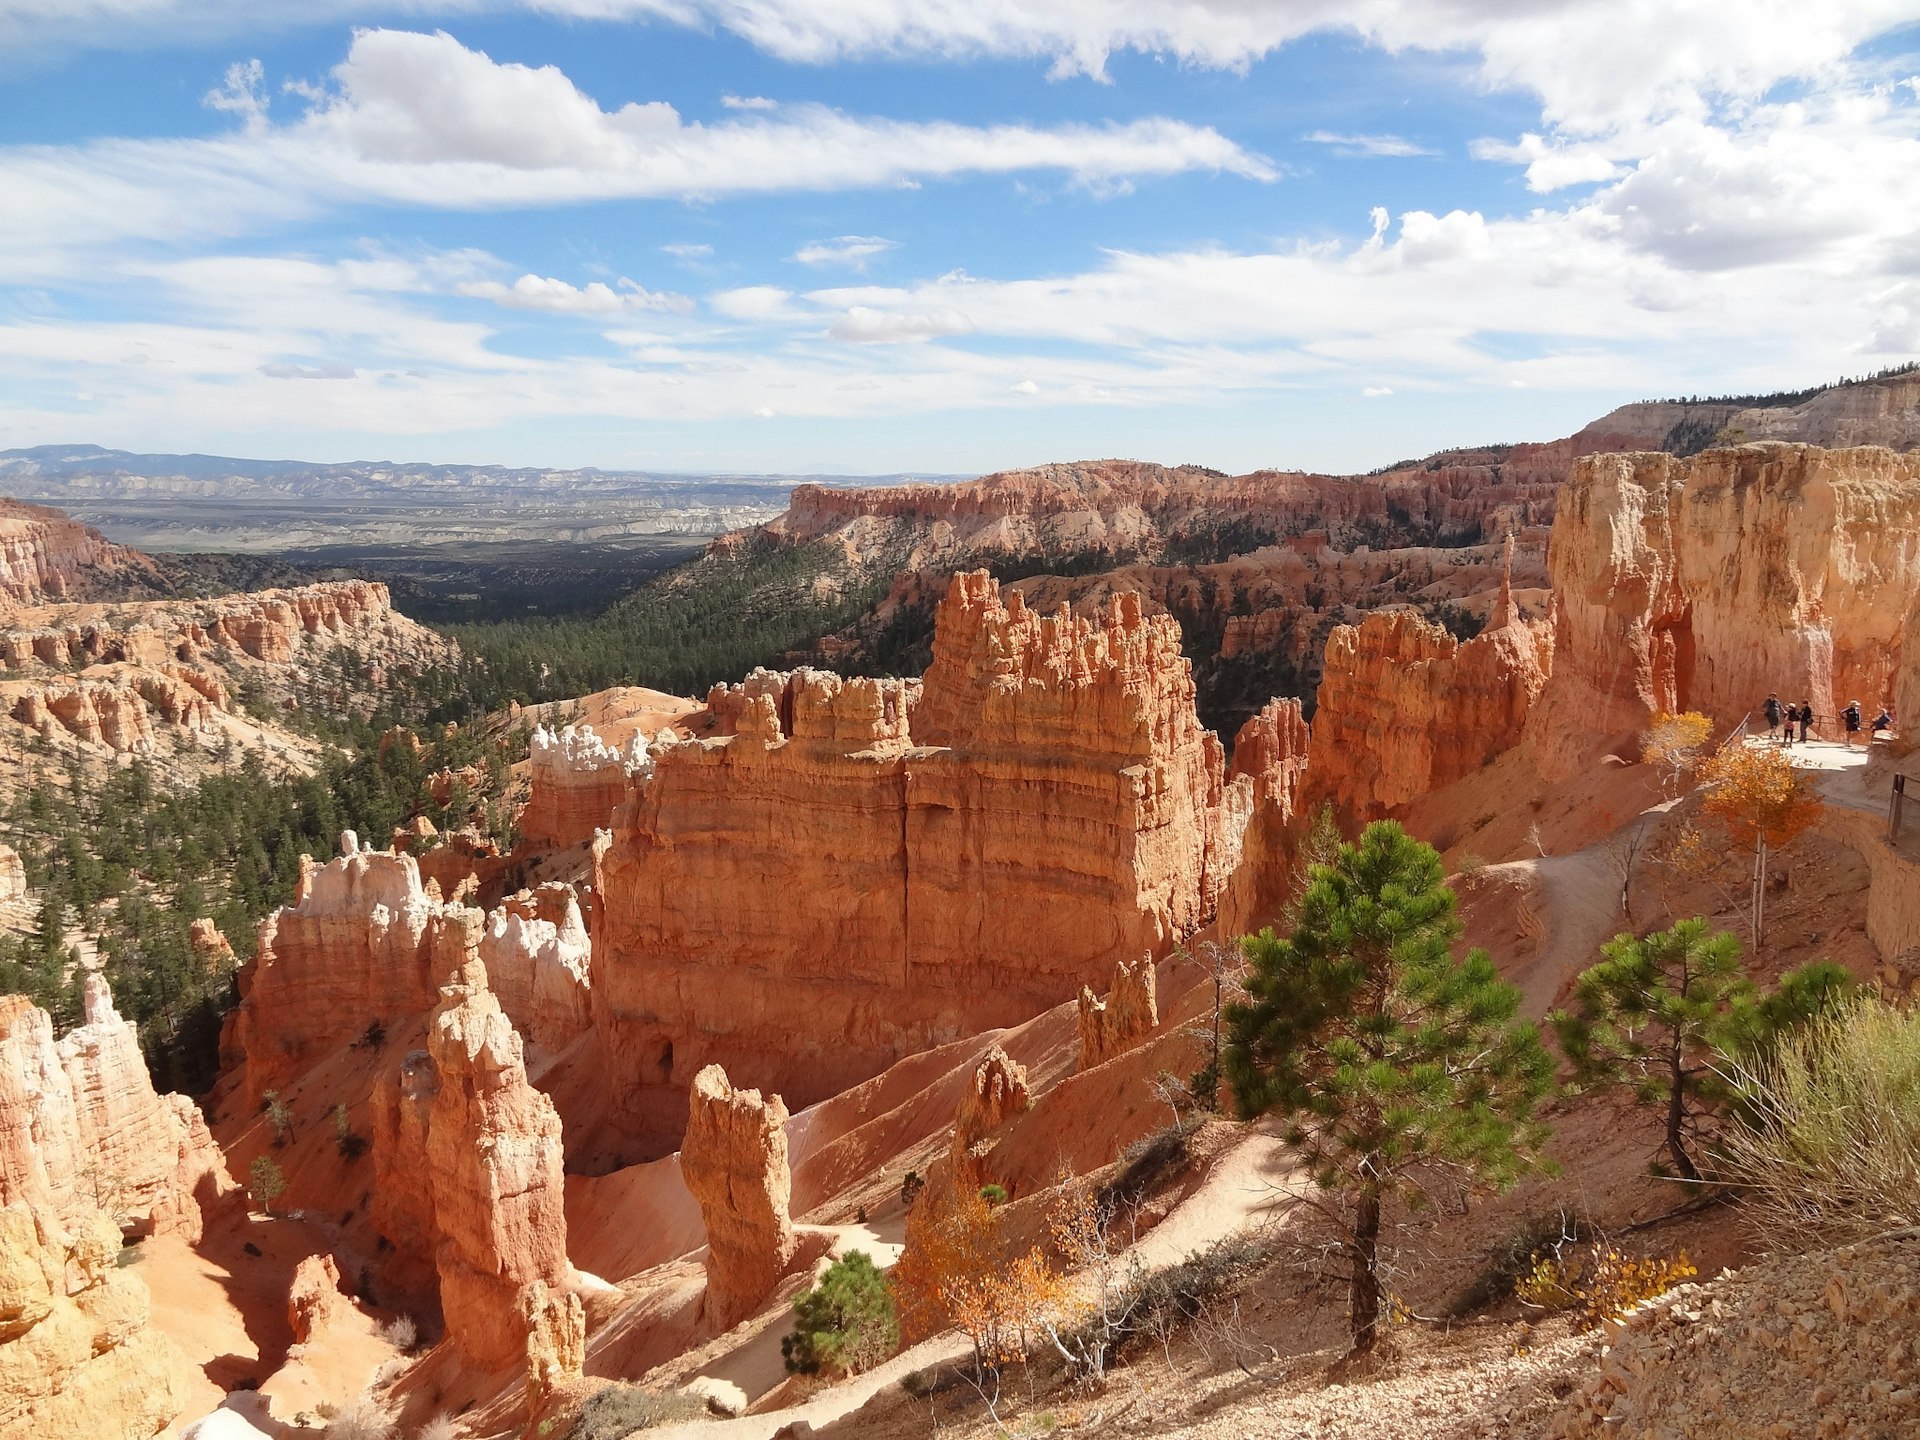 Bryce Canyon. Photo by Tracey Adams / CC BY 2.0